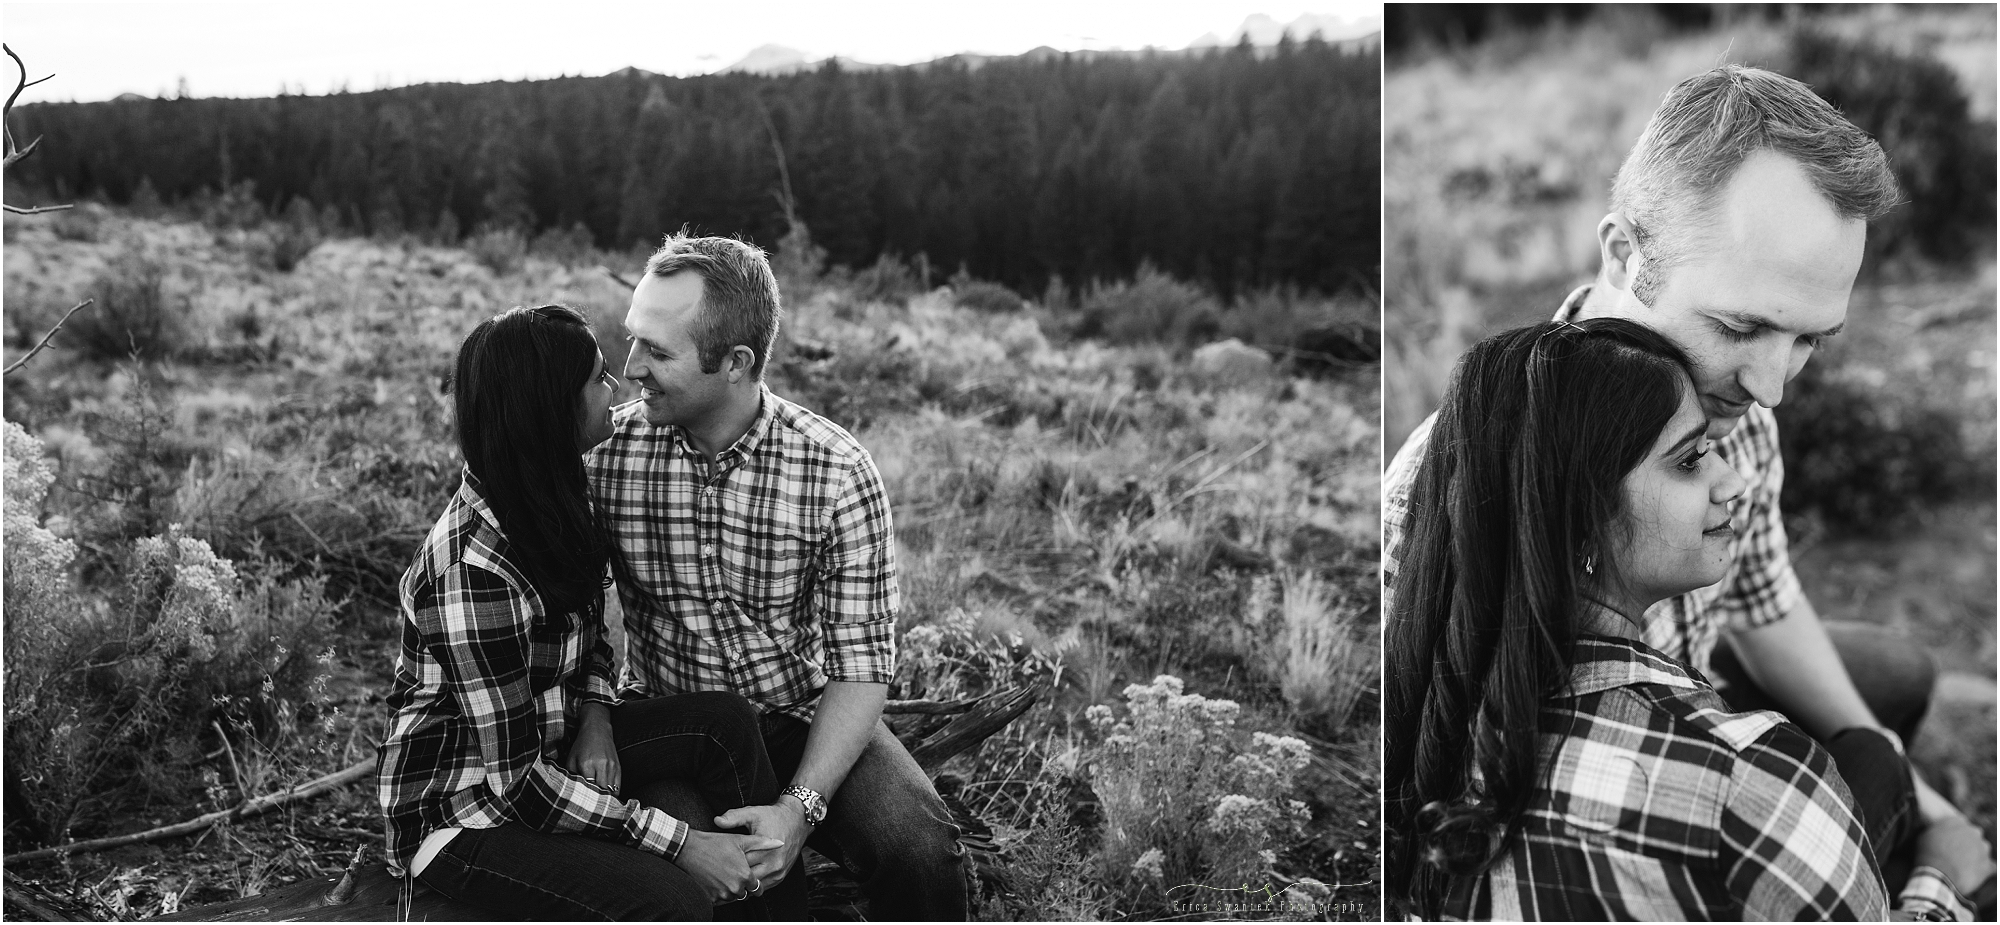 A beautiful moody black and white engagement photo at Shevlin Park in Bend, Oregon. 